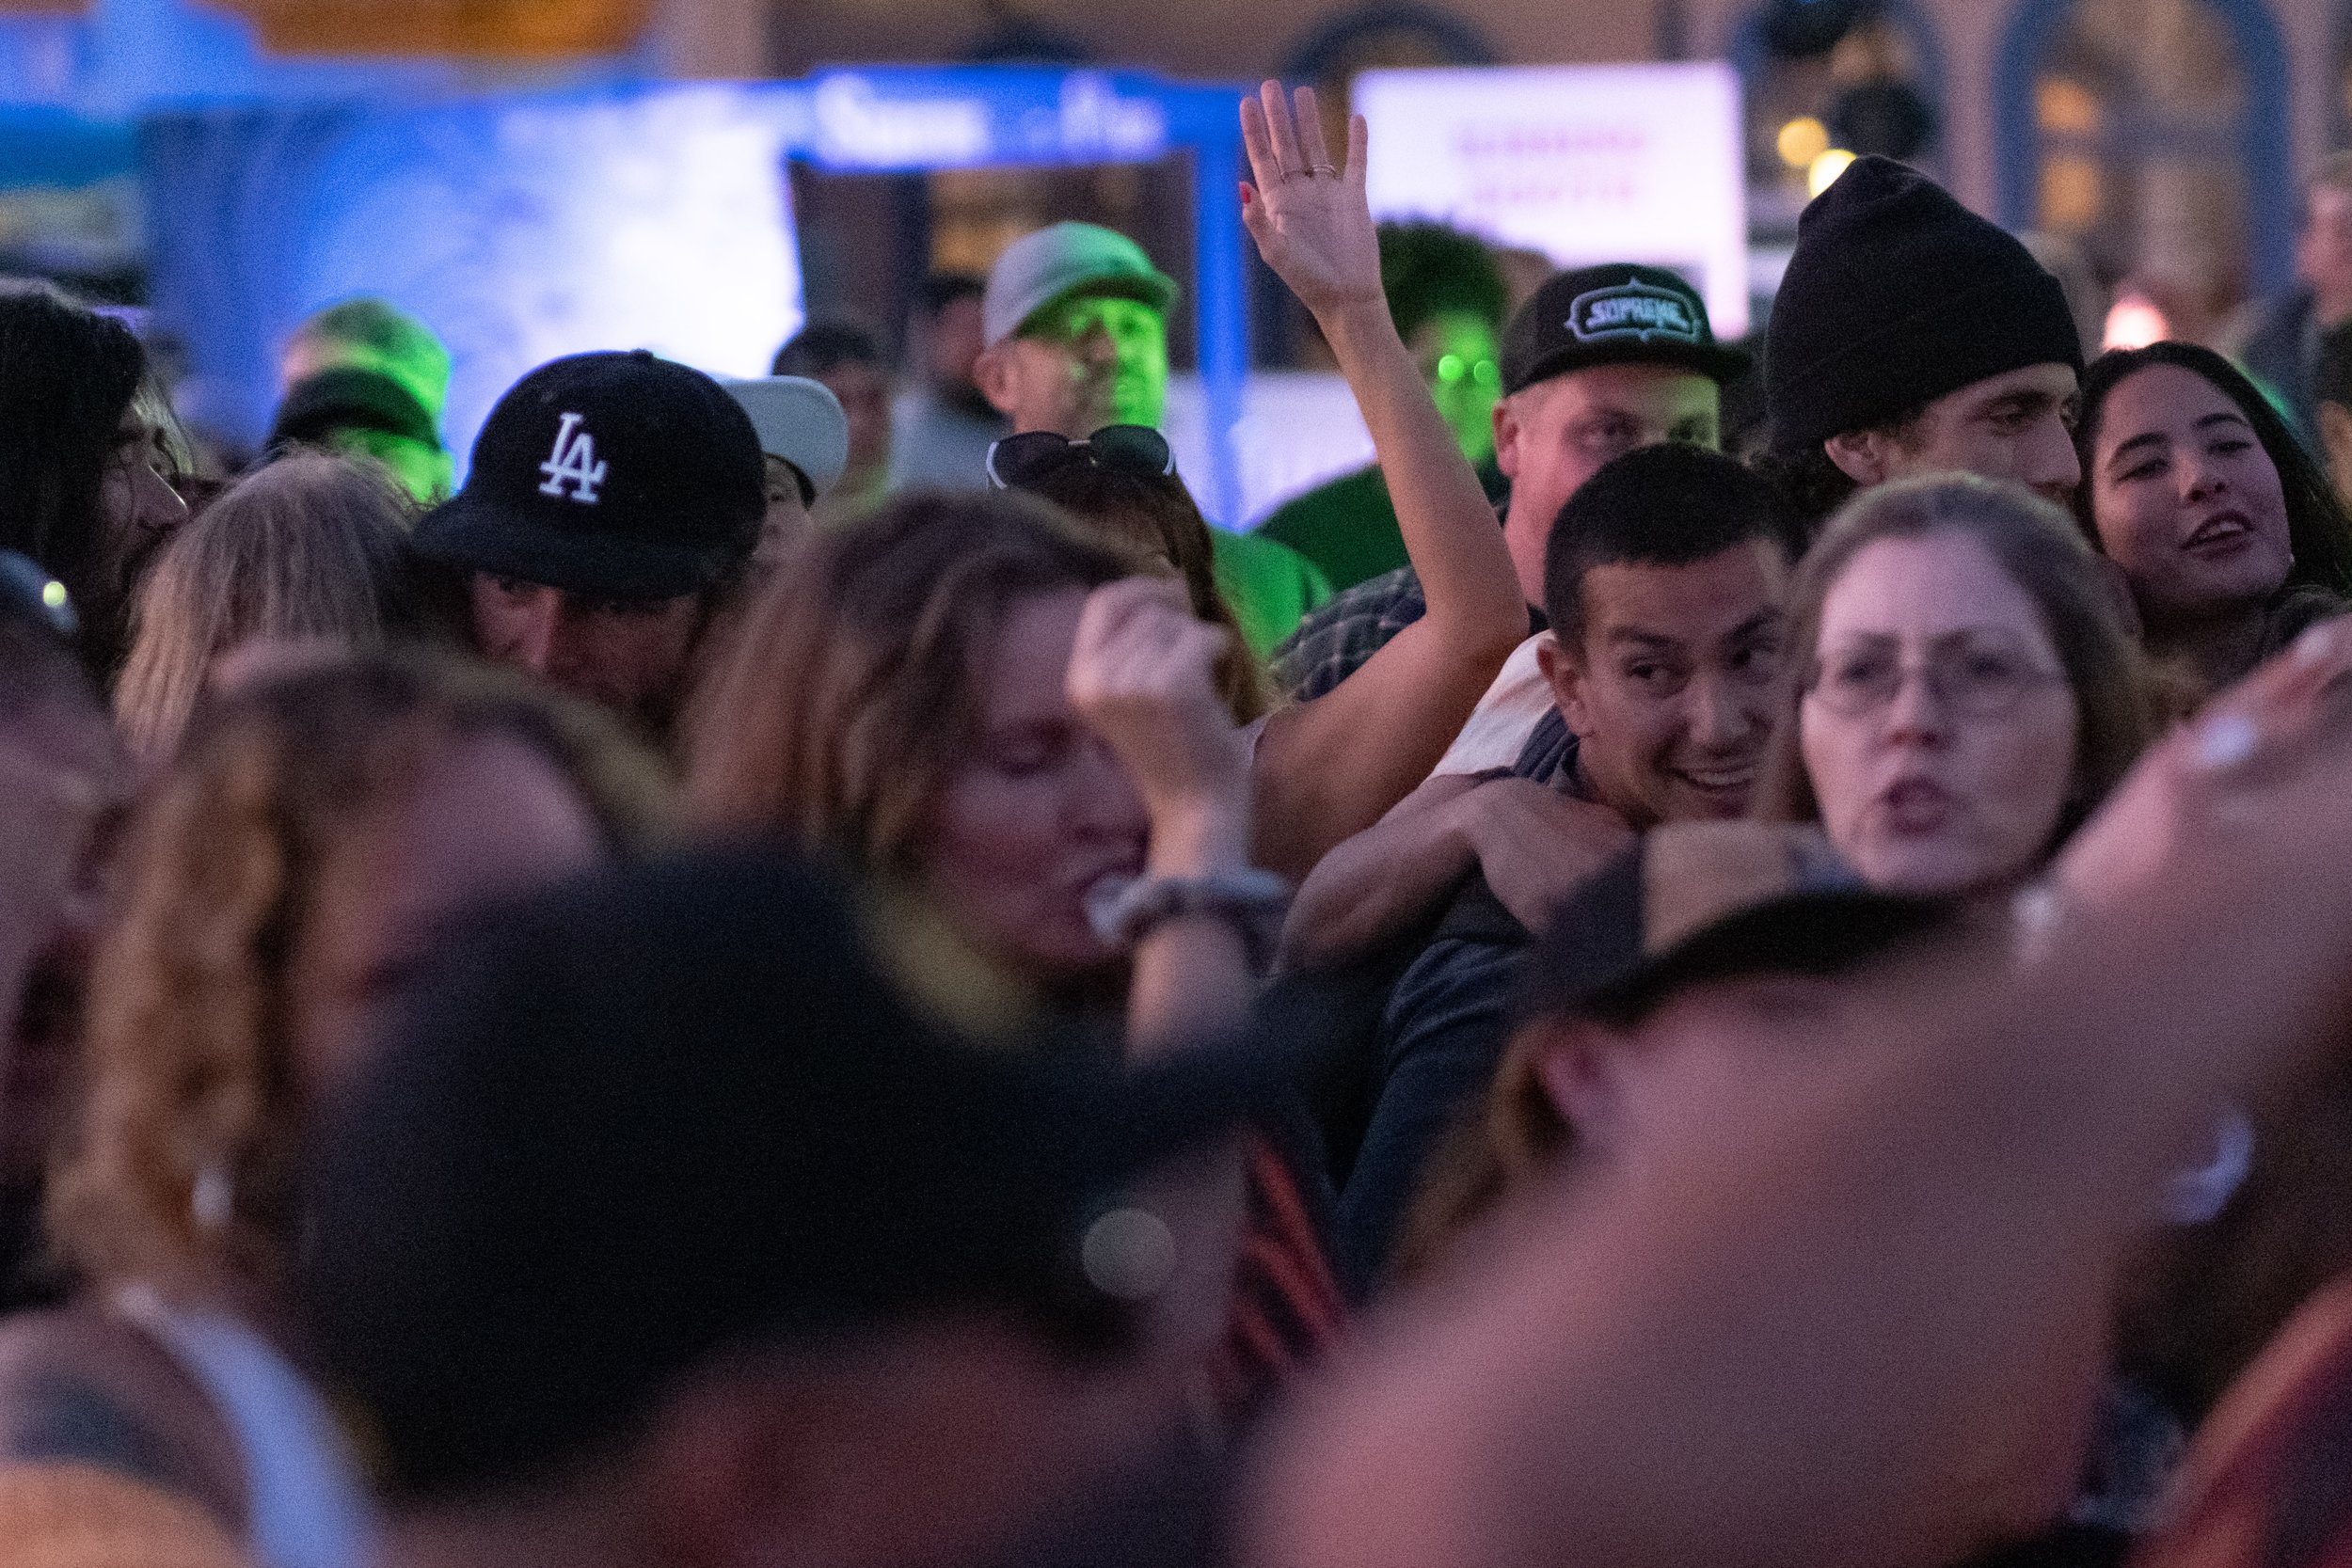  The audience was packed and dancing to the live band, The Horny Toads, at Locals' Night on Thursday, April 20, 2023 on the Santa Monica Pier on the parking deck in Santa Monica, Calif. The pier hosts Locals' Night every third Thursday with free prog